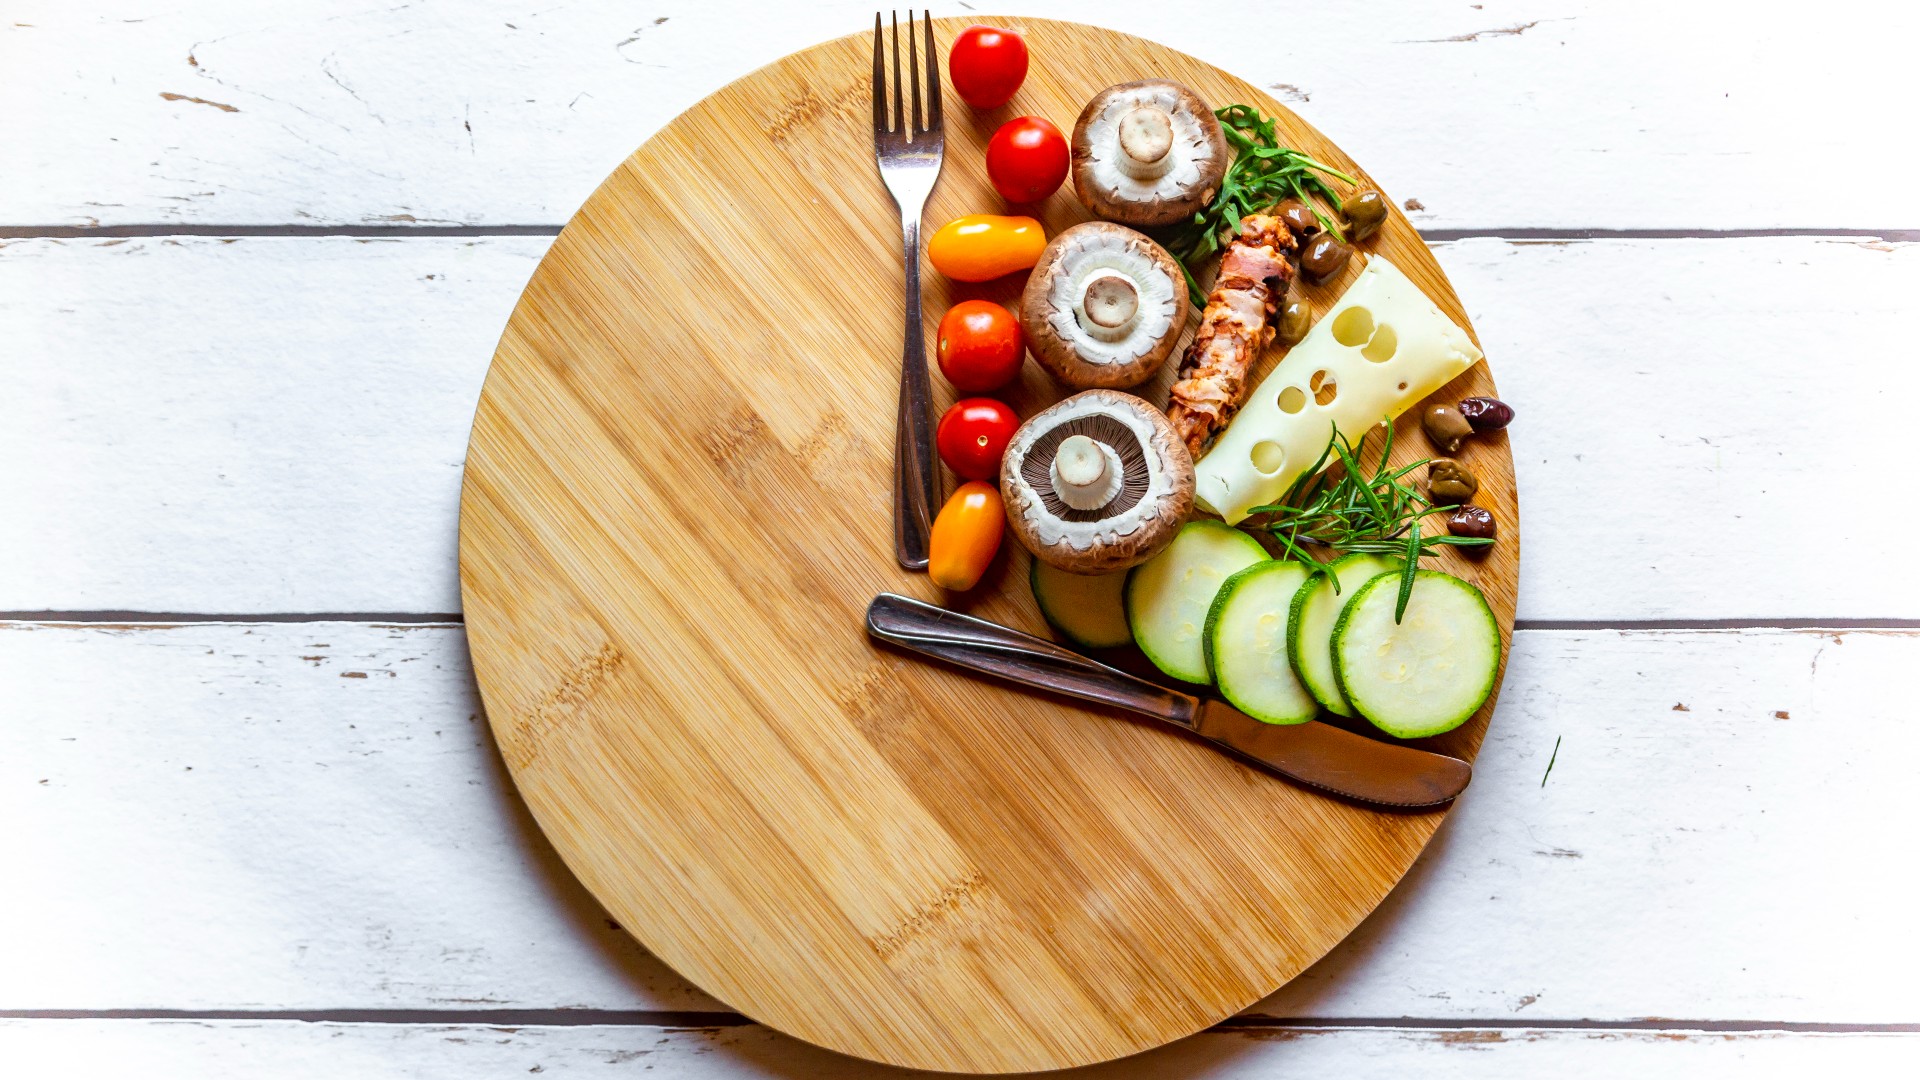 Round wooden board with a quarter portion of vegetables symbolising intermittent fasting